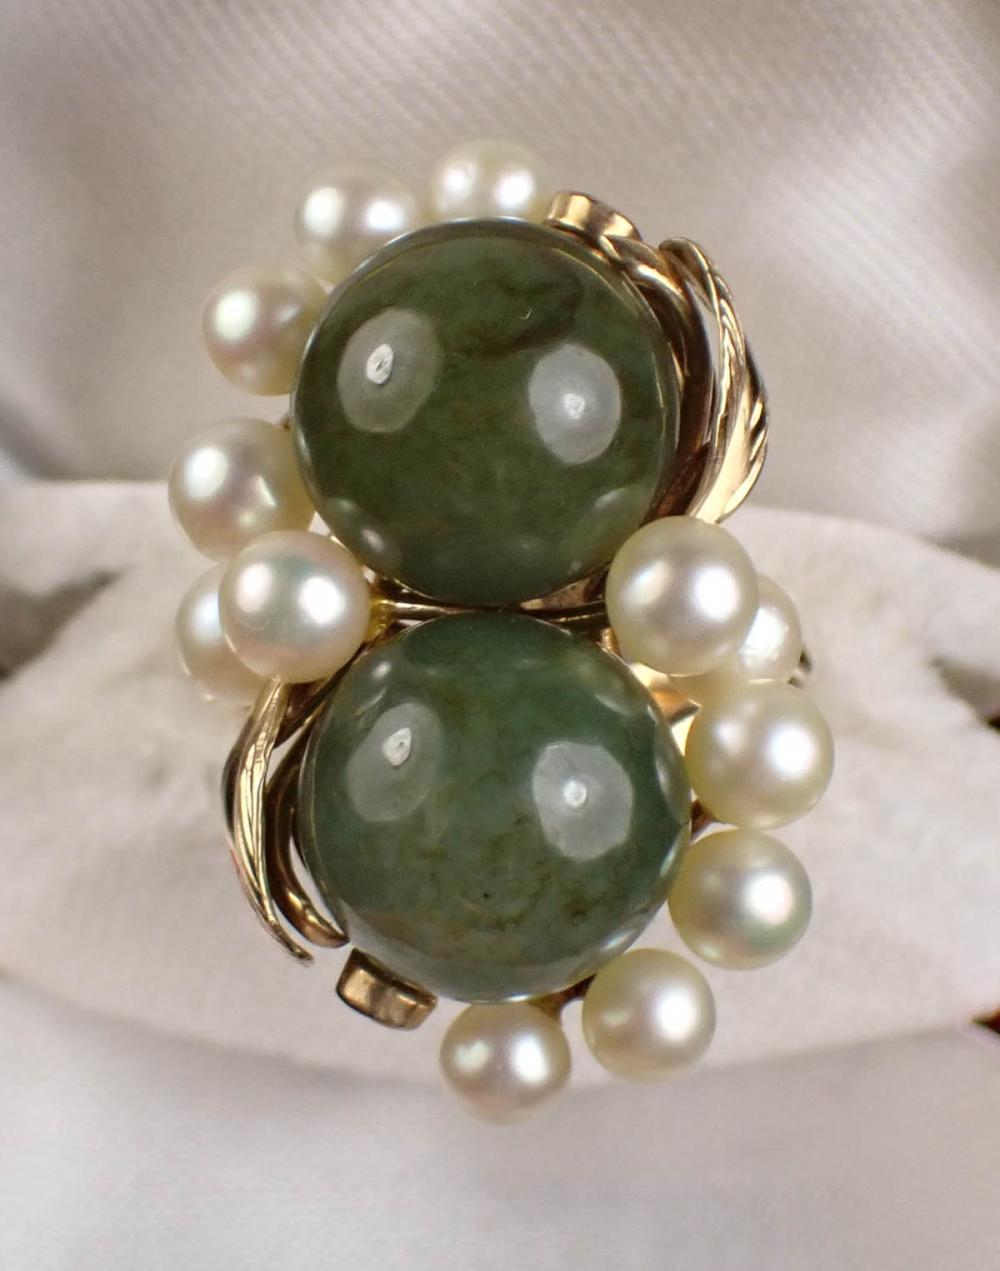 MING'S GOLD RING WITH JADE & PEARLSMING'S